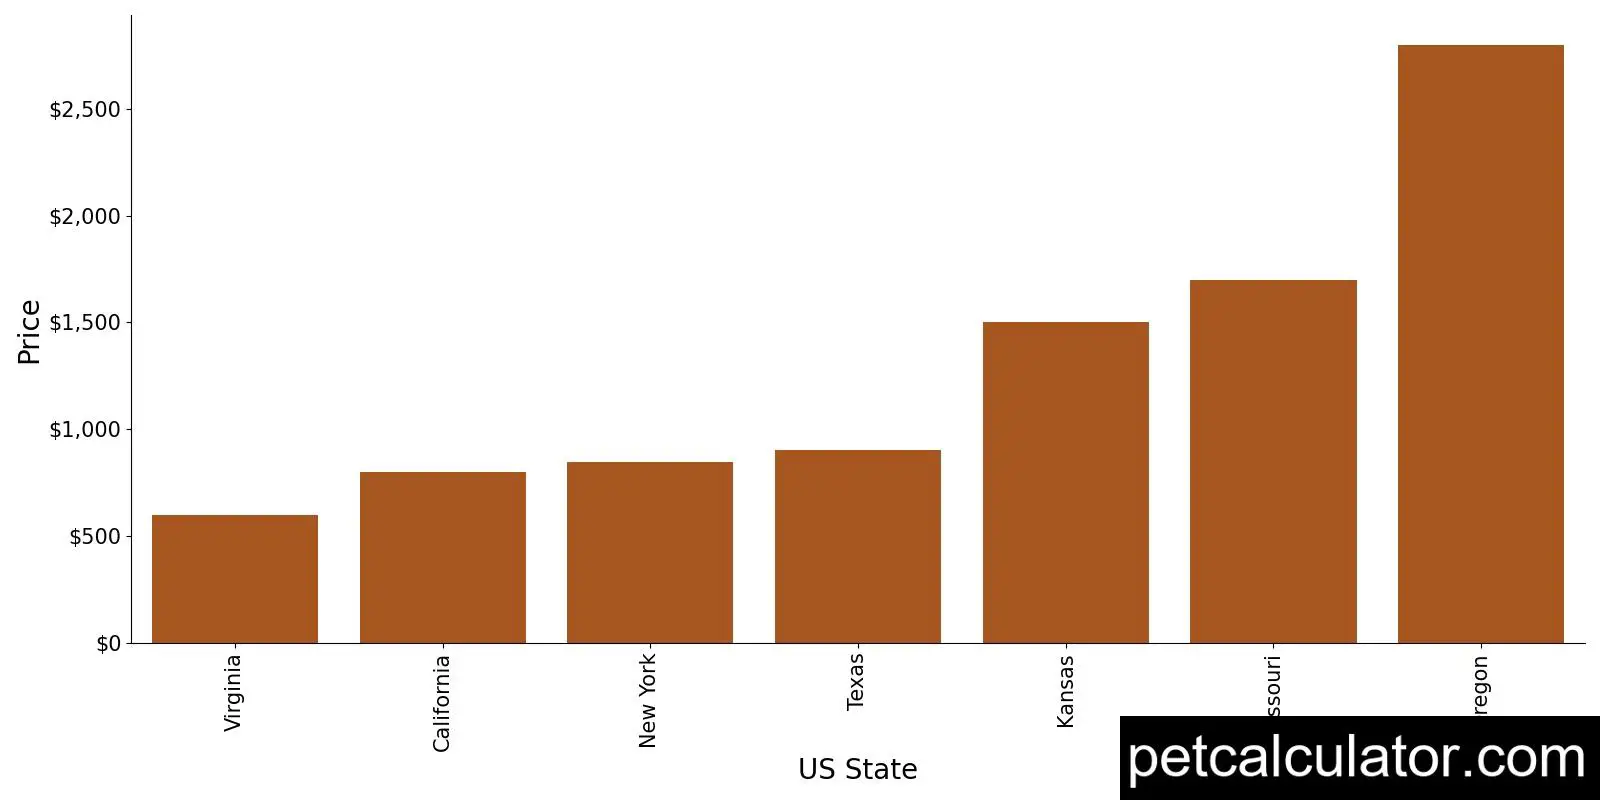 Price of Irish Terrier by US State 